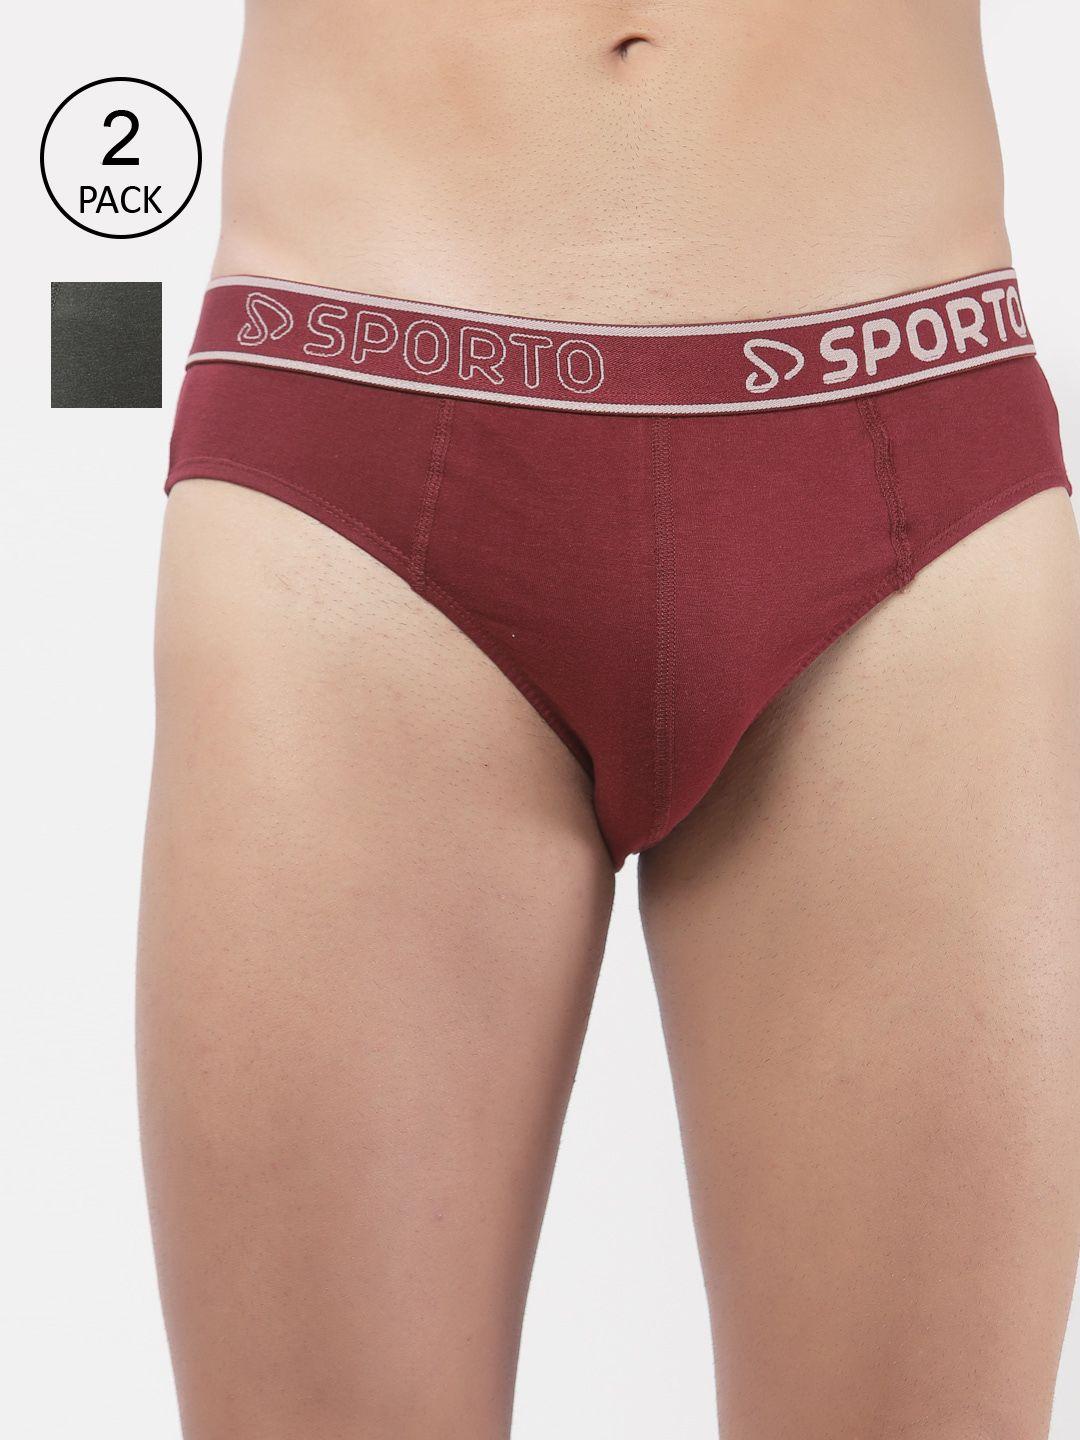 sporto men pack of 2 maroon & olive solid cotton briefs